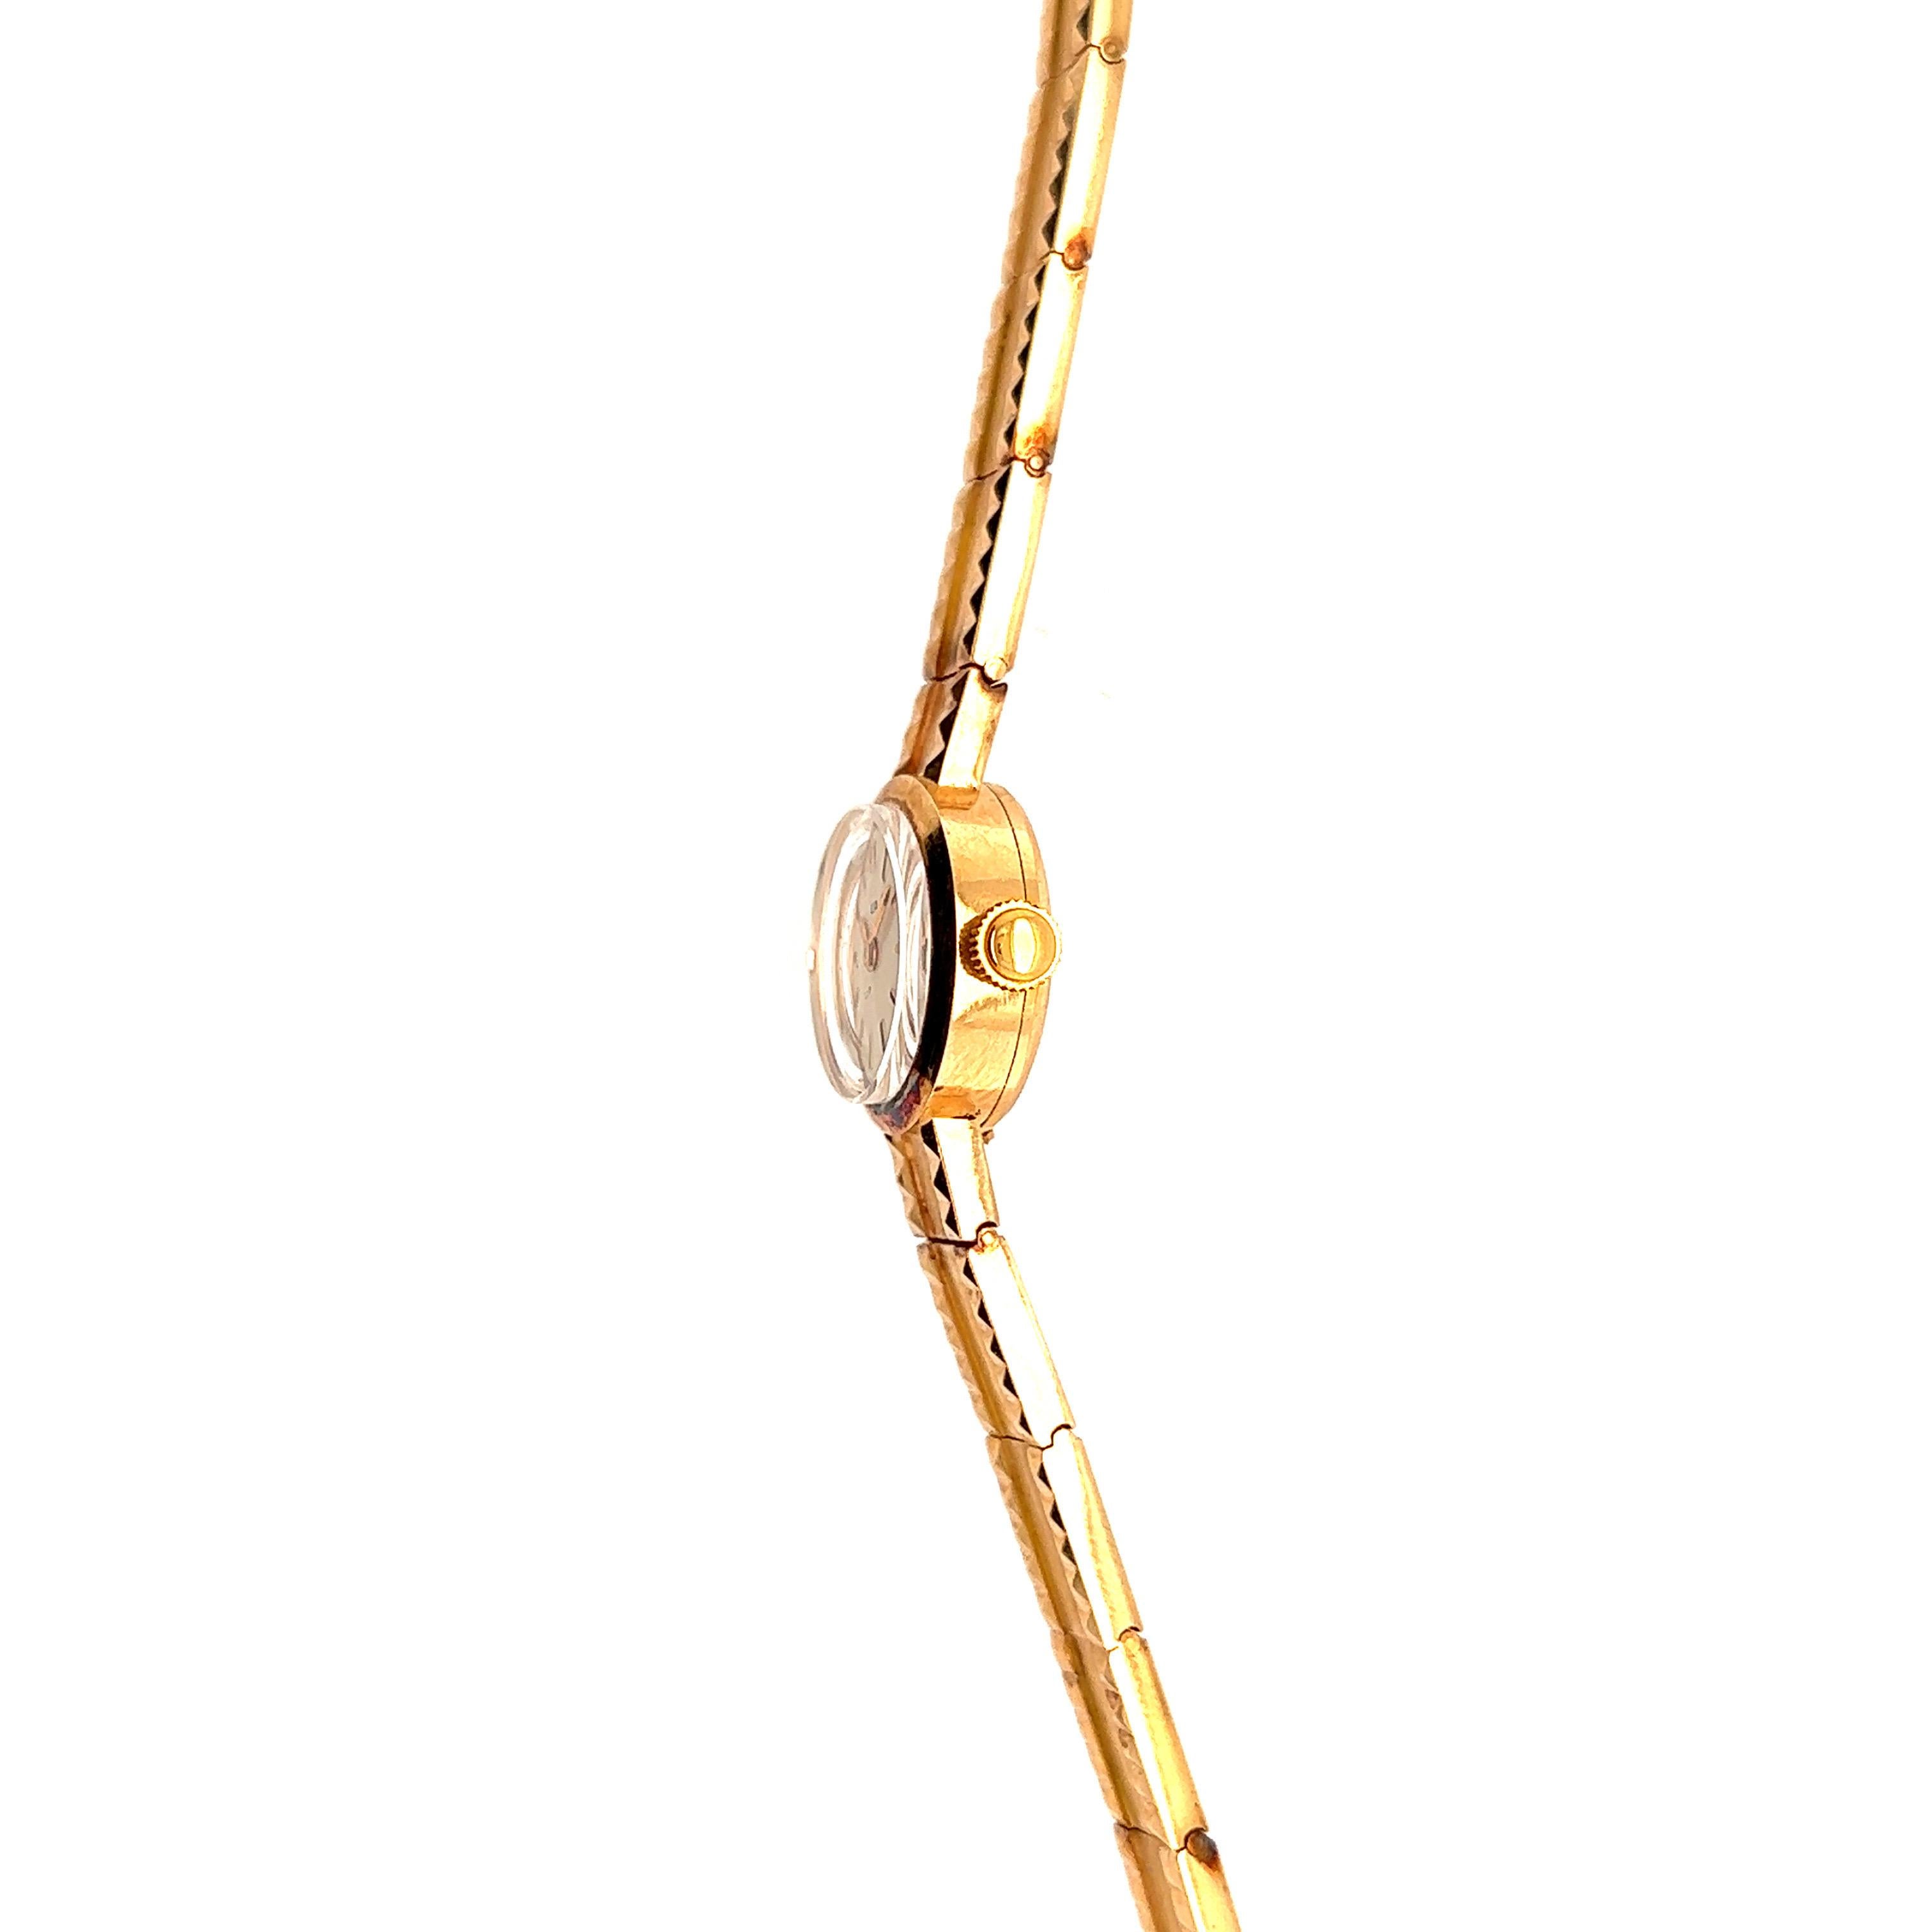 Carefully crafted, this LIP watch combines classic elegance with timeless charm. This vintage bracelet watch is a real gem in 18-carat yellow gold. Yellow gold, with its warm, radiant hue, gives this watch a look that is both luxurious and refined.